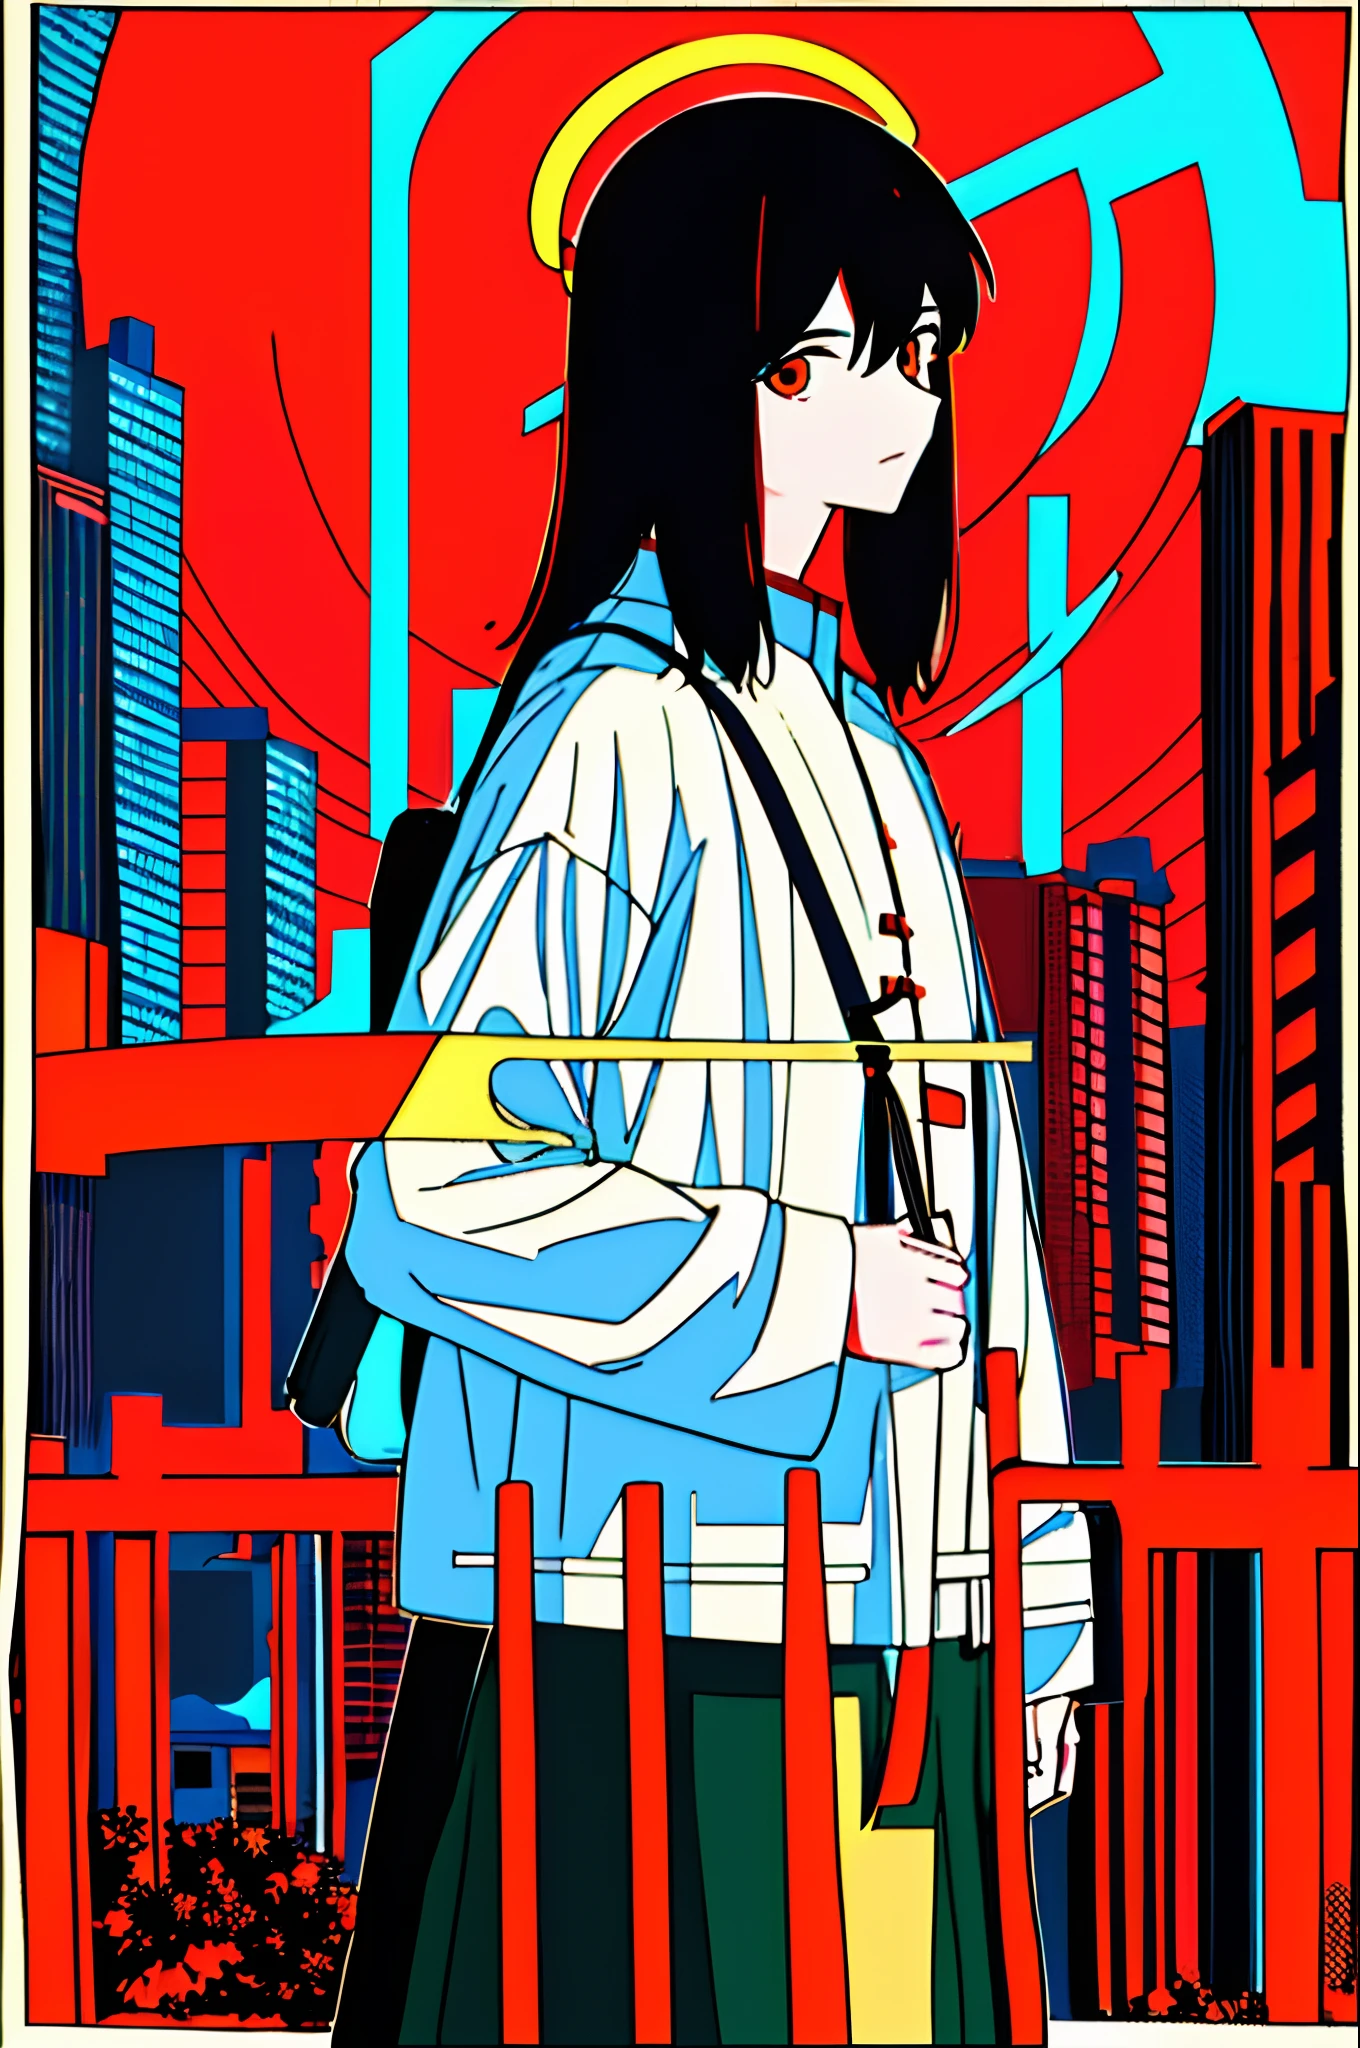 Masterpiece, Best quality, Flat color, limited palette, Low contrast, (Clear lines), 1boys, Black color hair, Beautiful detailed face,Halation, Take your eyes off your backpack, Naked boy standing. Smoke, Night sky, City, Sunset, skyscrapper, bridge, road signs, Depth of field, border, Naked male black, Red, orange, brown, Autumn, haze，